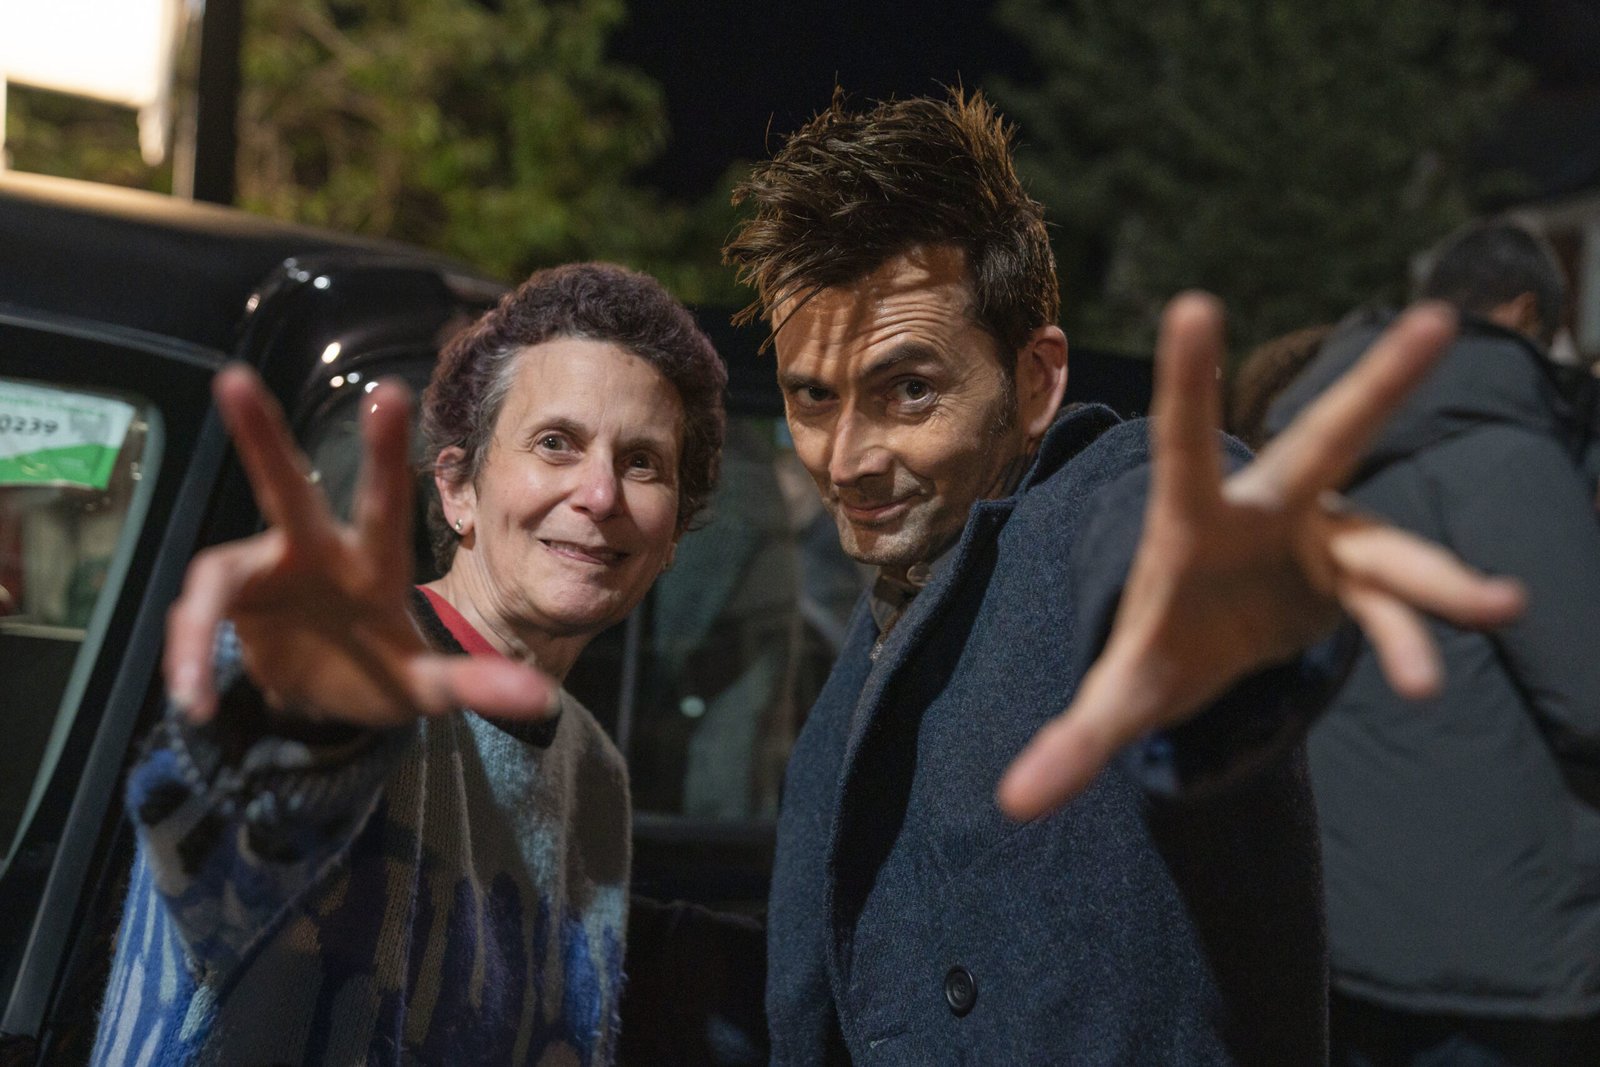 The Star Beast Director Rachel Talalay Had No Involvement with the Doctor Who Pre-Titles [UPDATED]